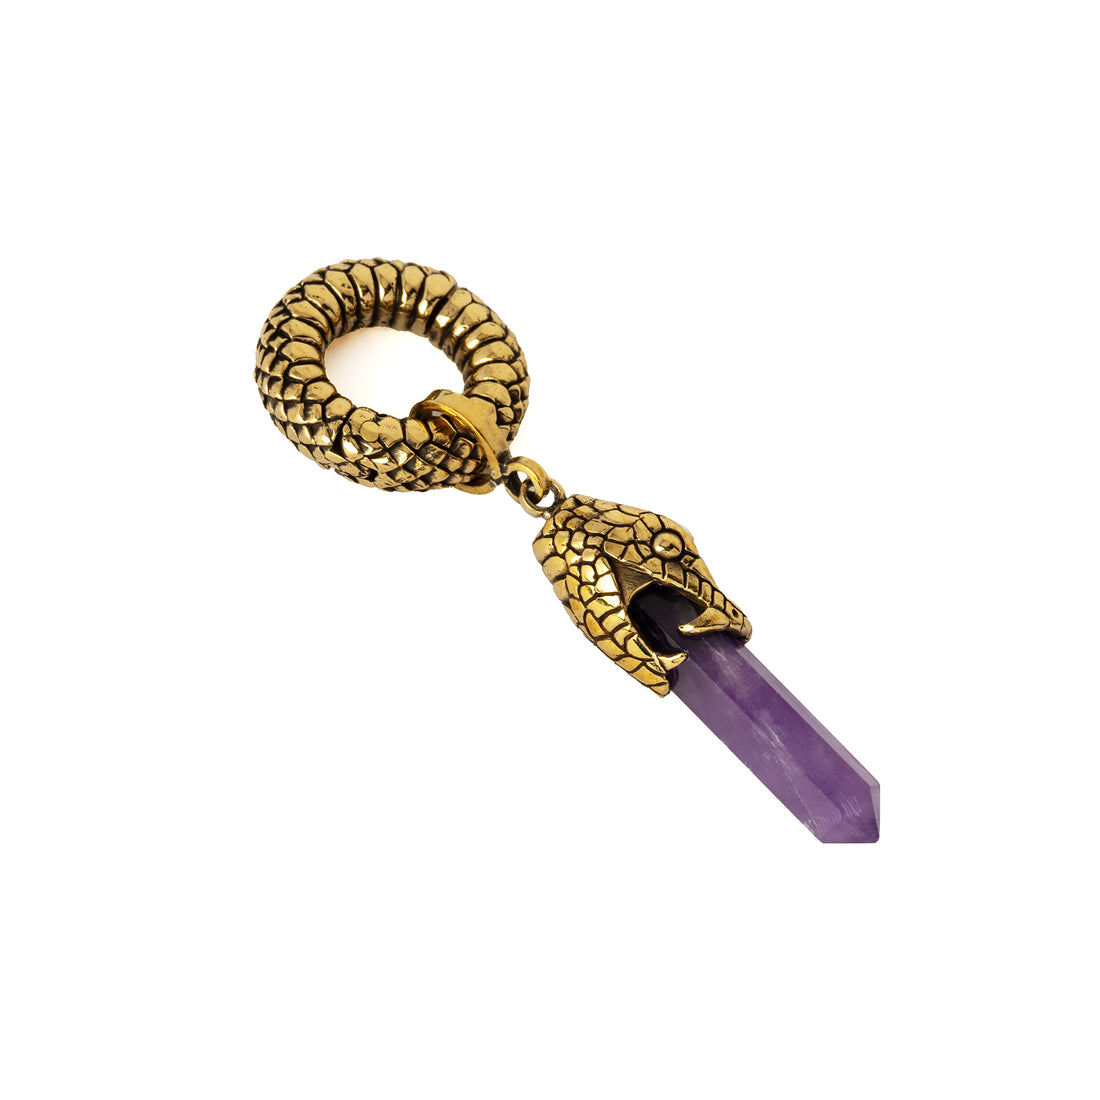 Rebirth Snake Hanger with Amethyst right side view